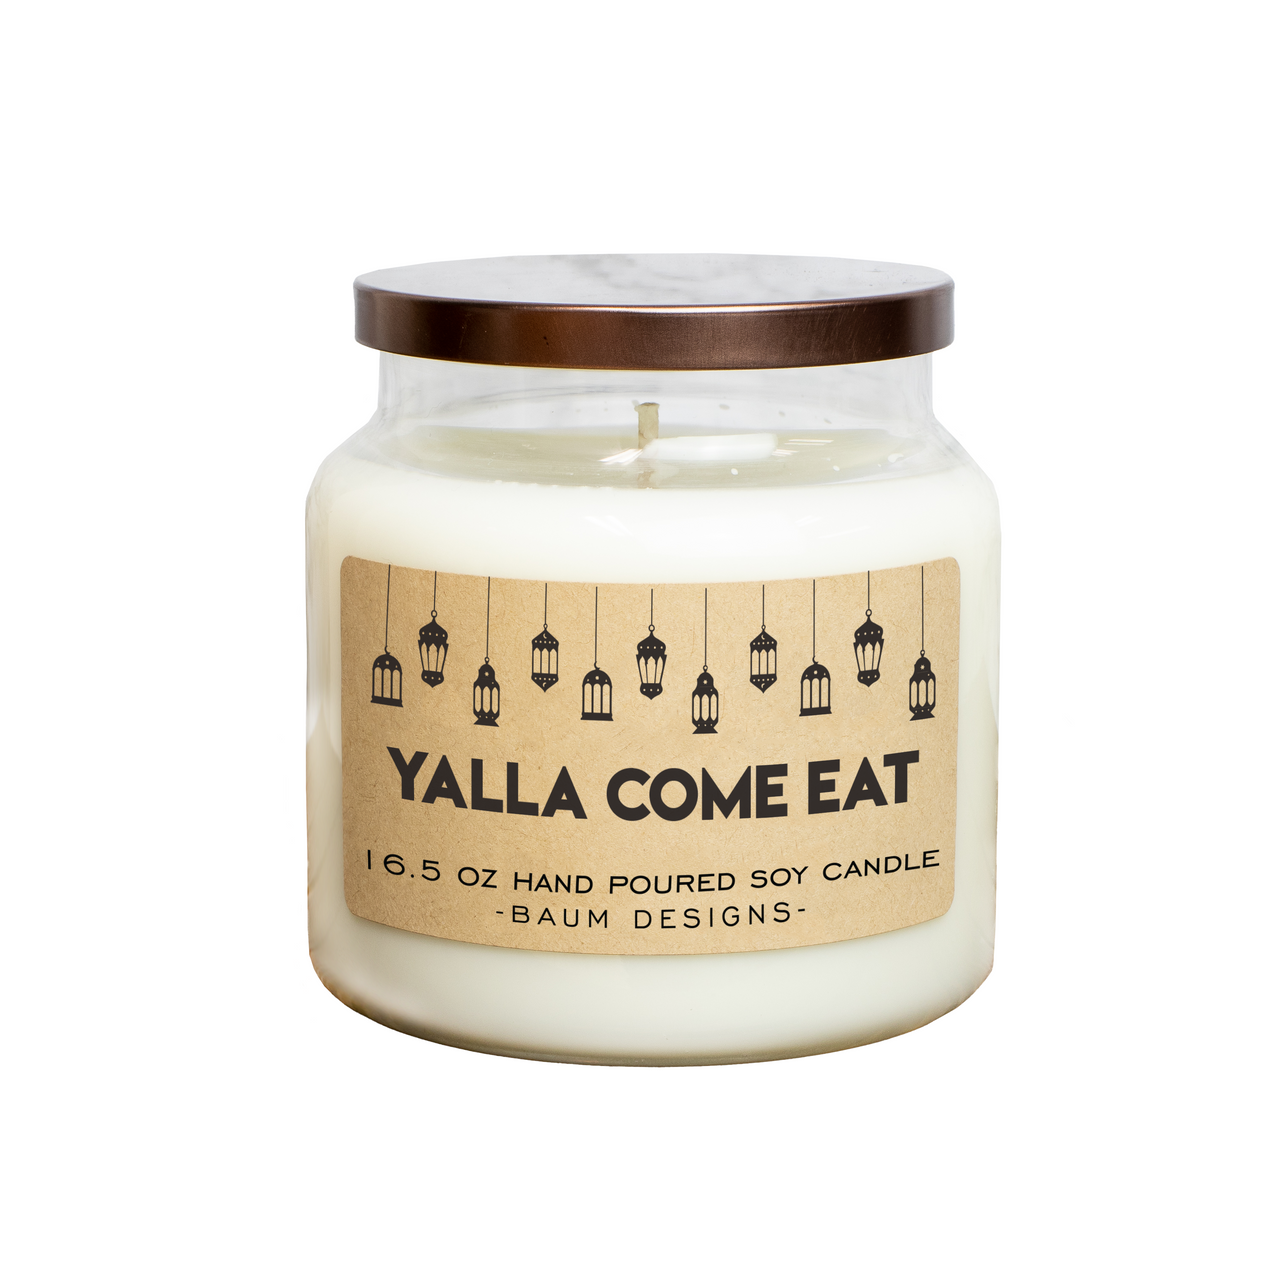 Yalla Come Eat Soy Candle Baum Designs